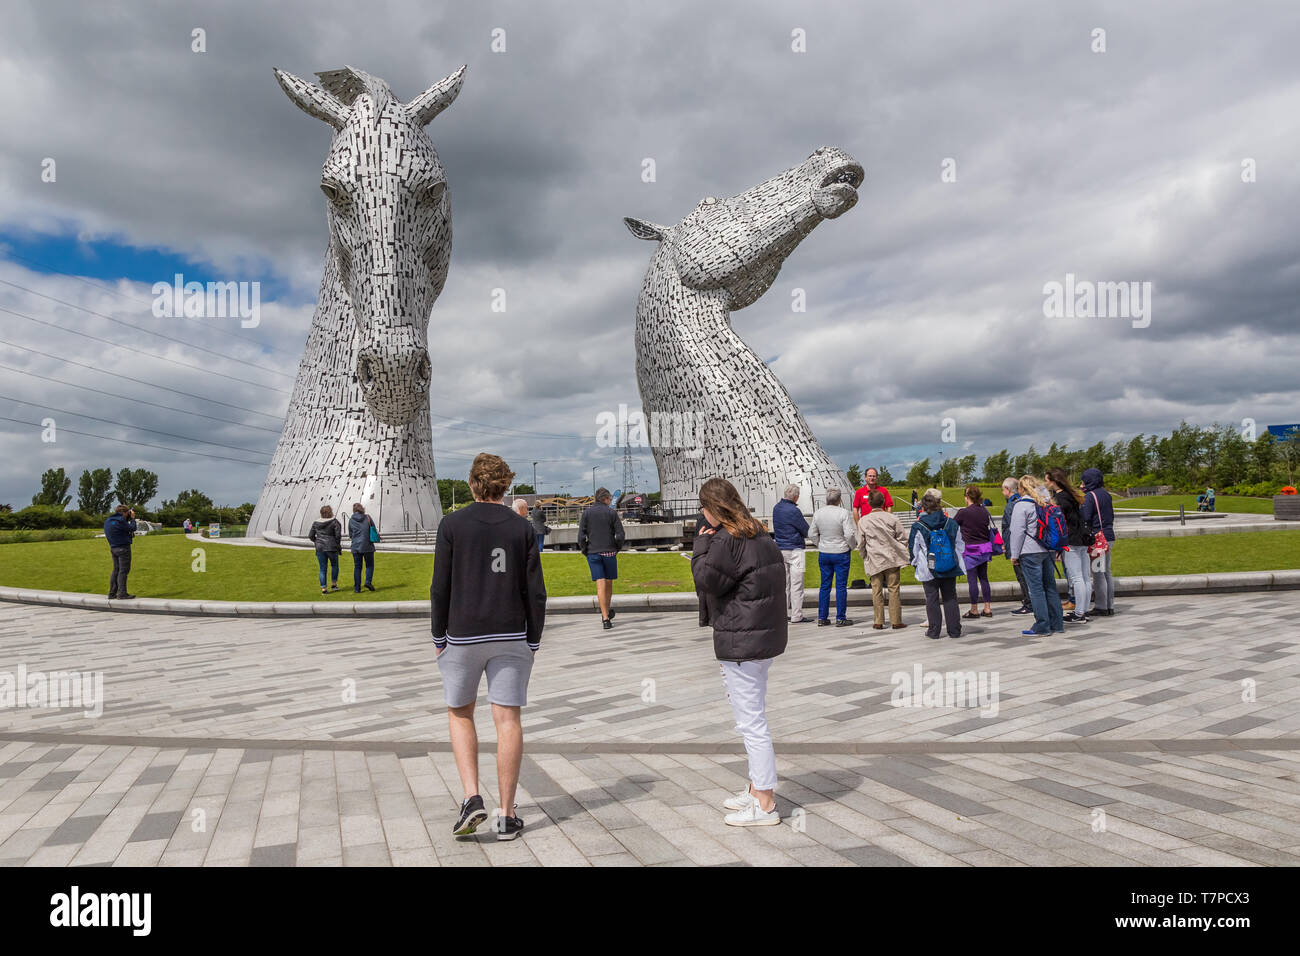 Falkirk, Scotland, 2016, June 27: Kelpies by Andrew Scot. These are the world's largest equine sculptures. Stock Photo